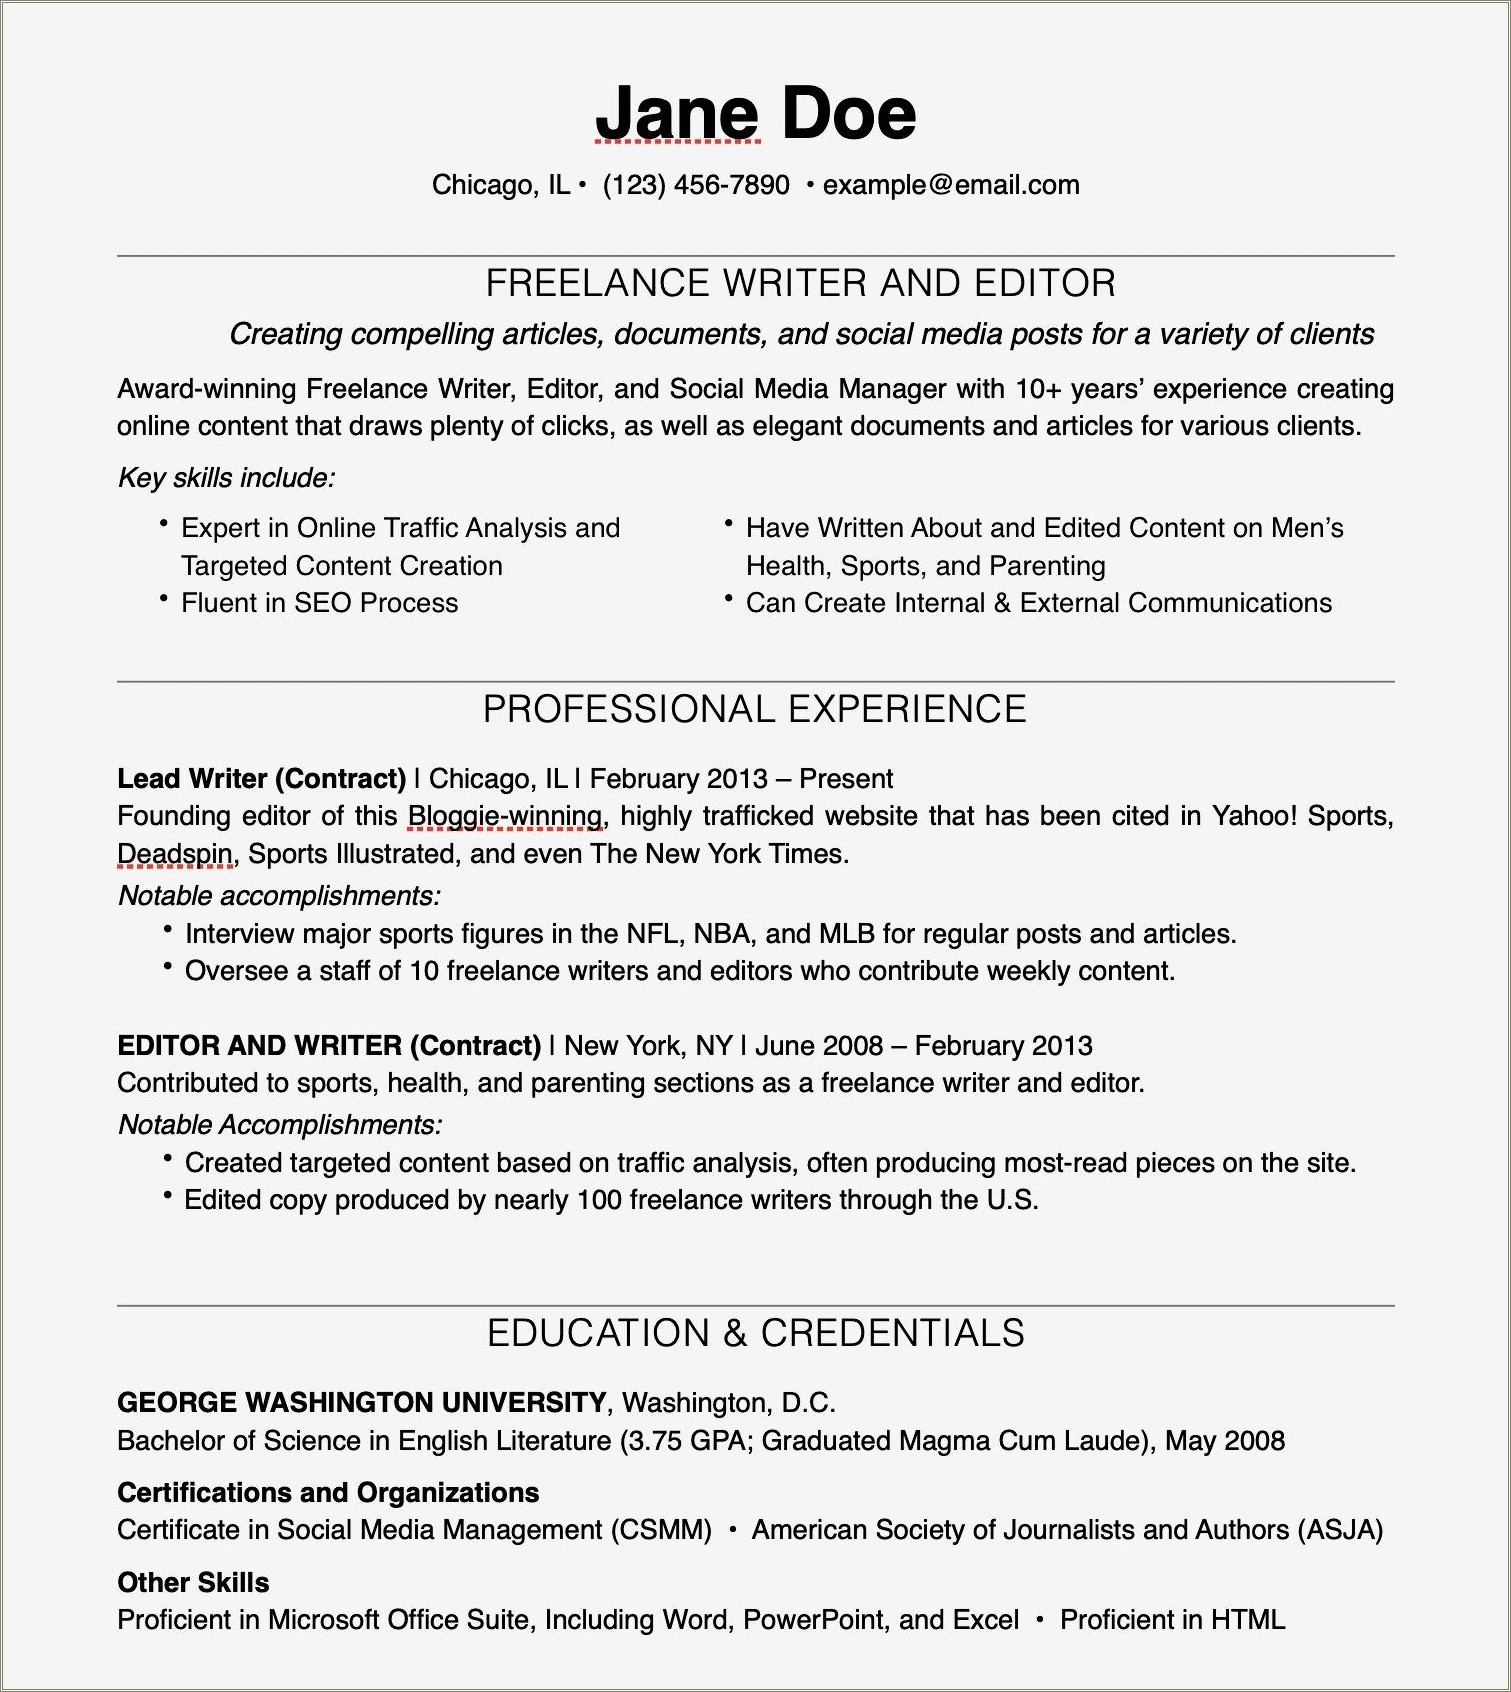 Can You Put Self Experience On Resume